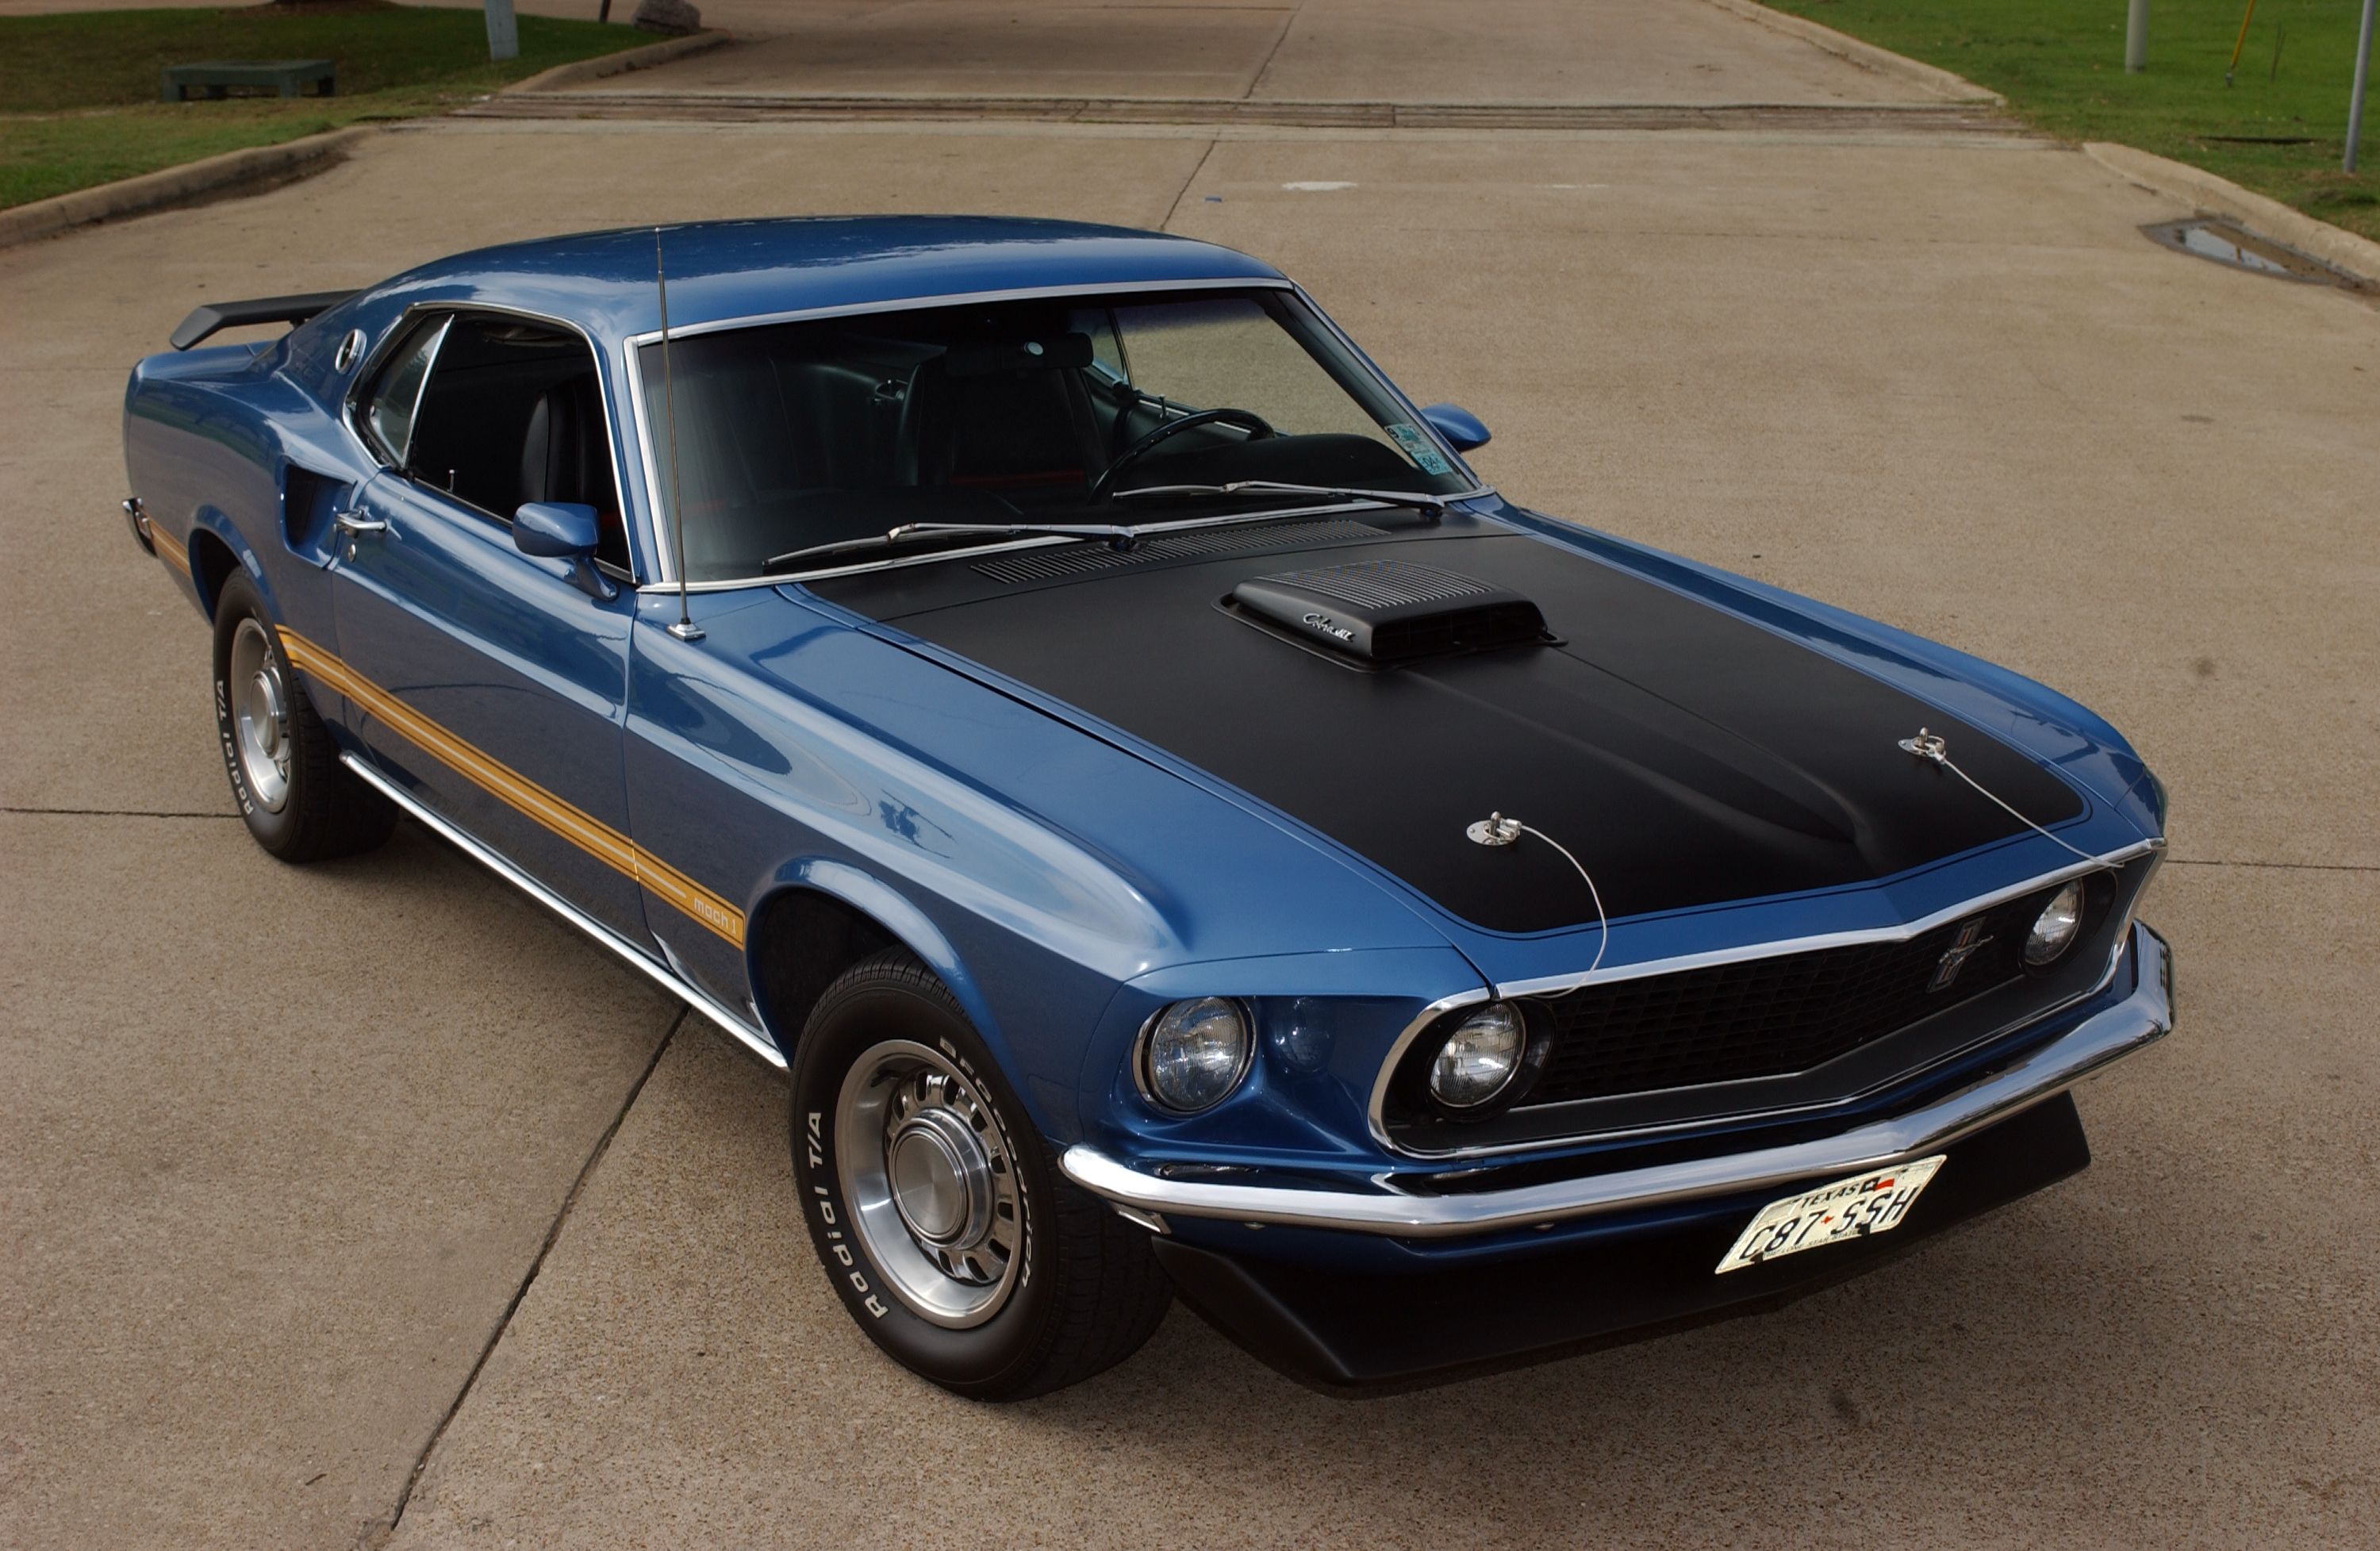 Vehicles Ford Mustang Mach 1 HD Wallpaper | Background Image